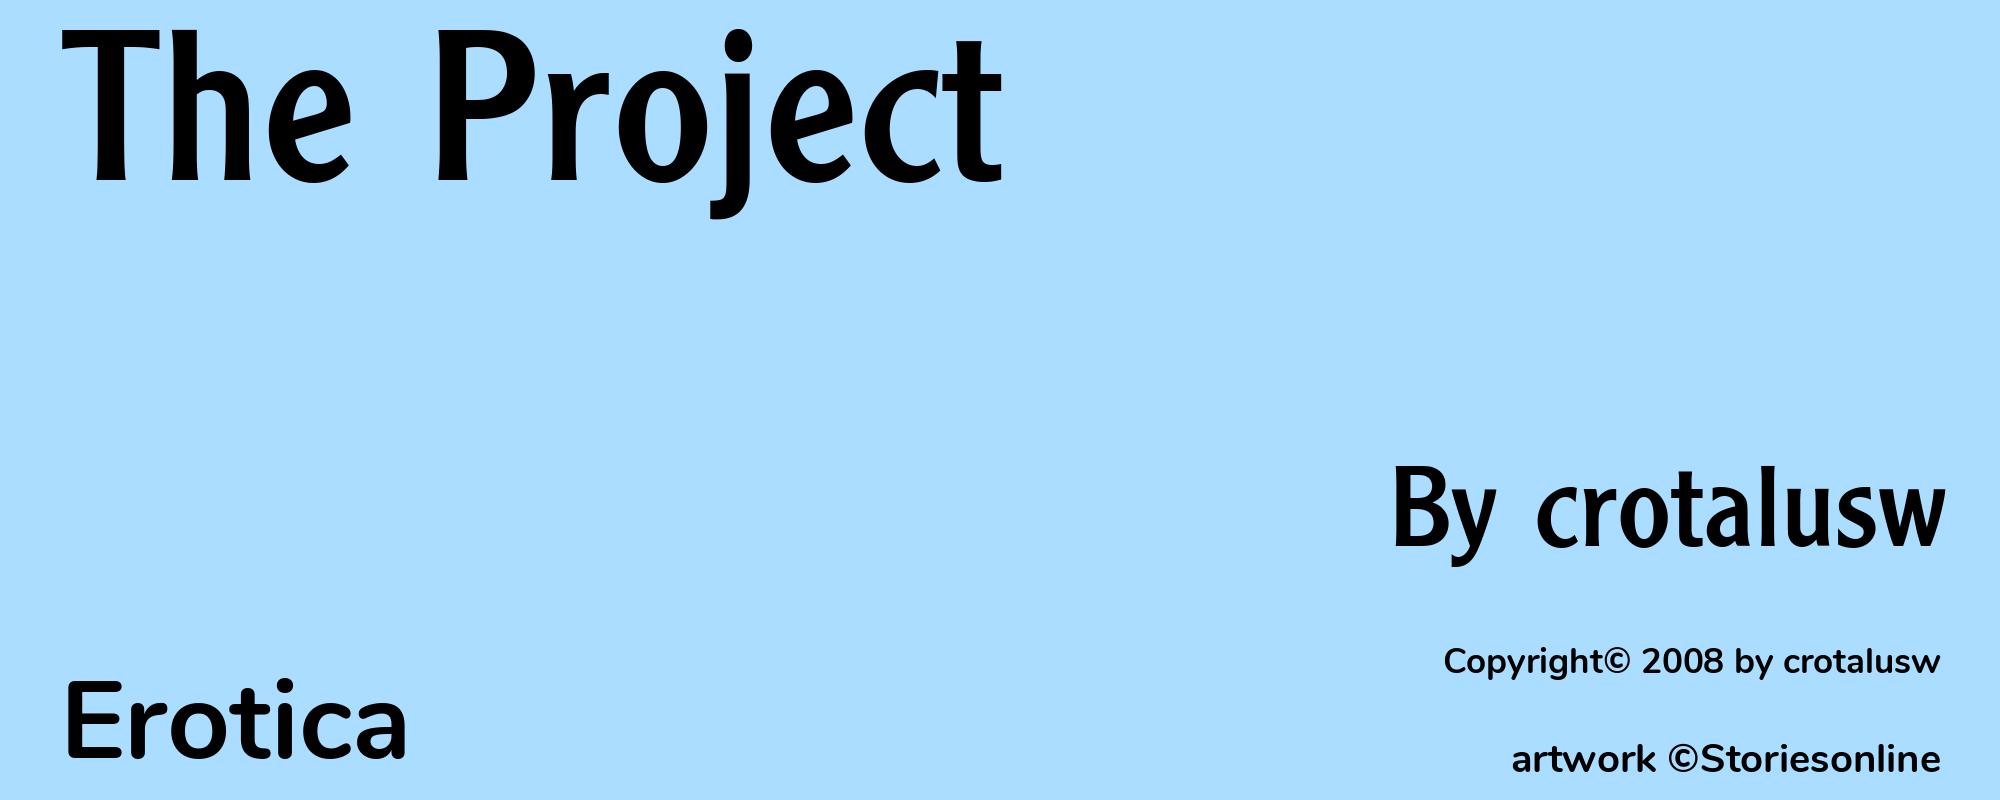 The Project - Cover